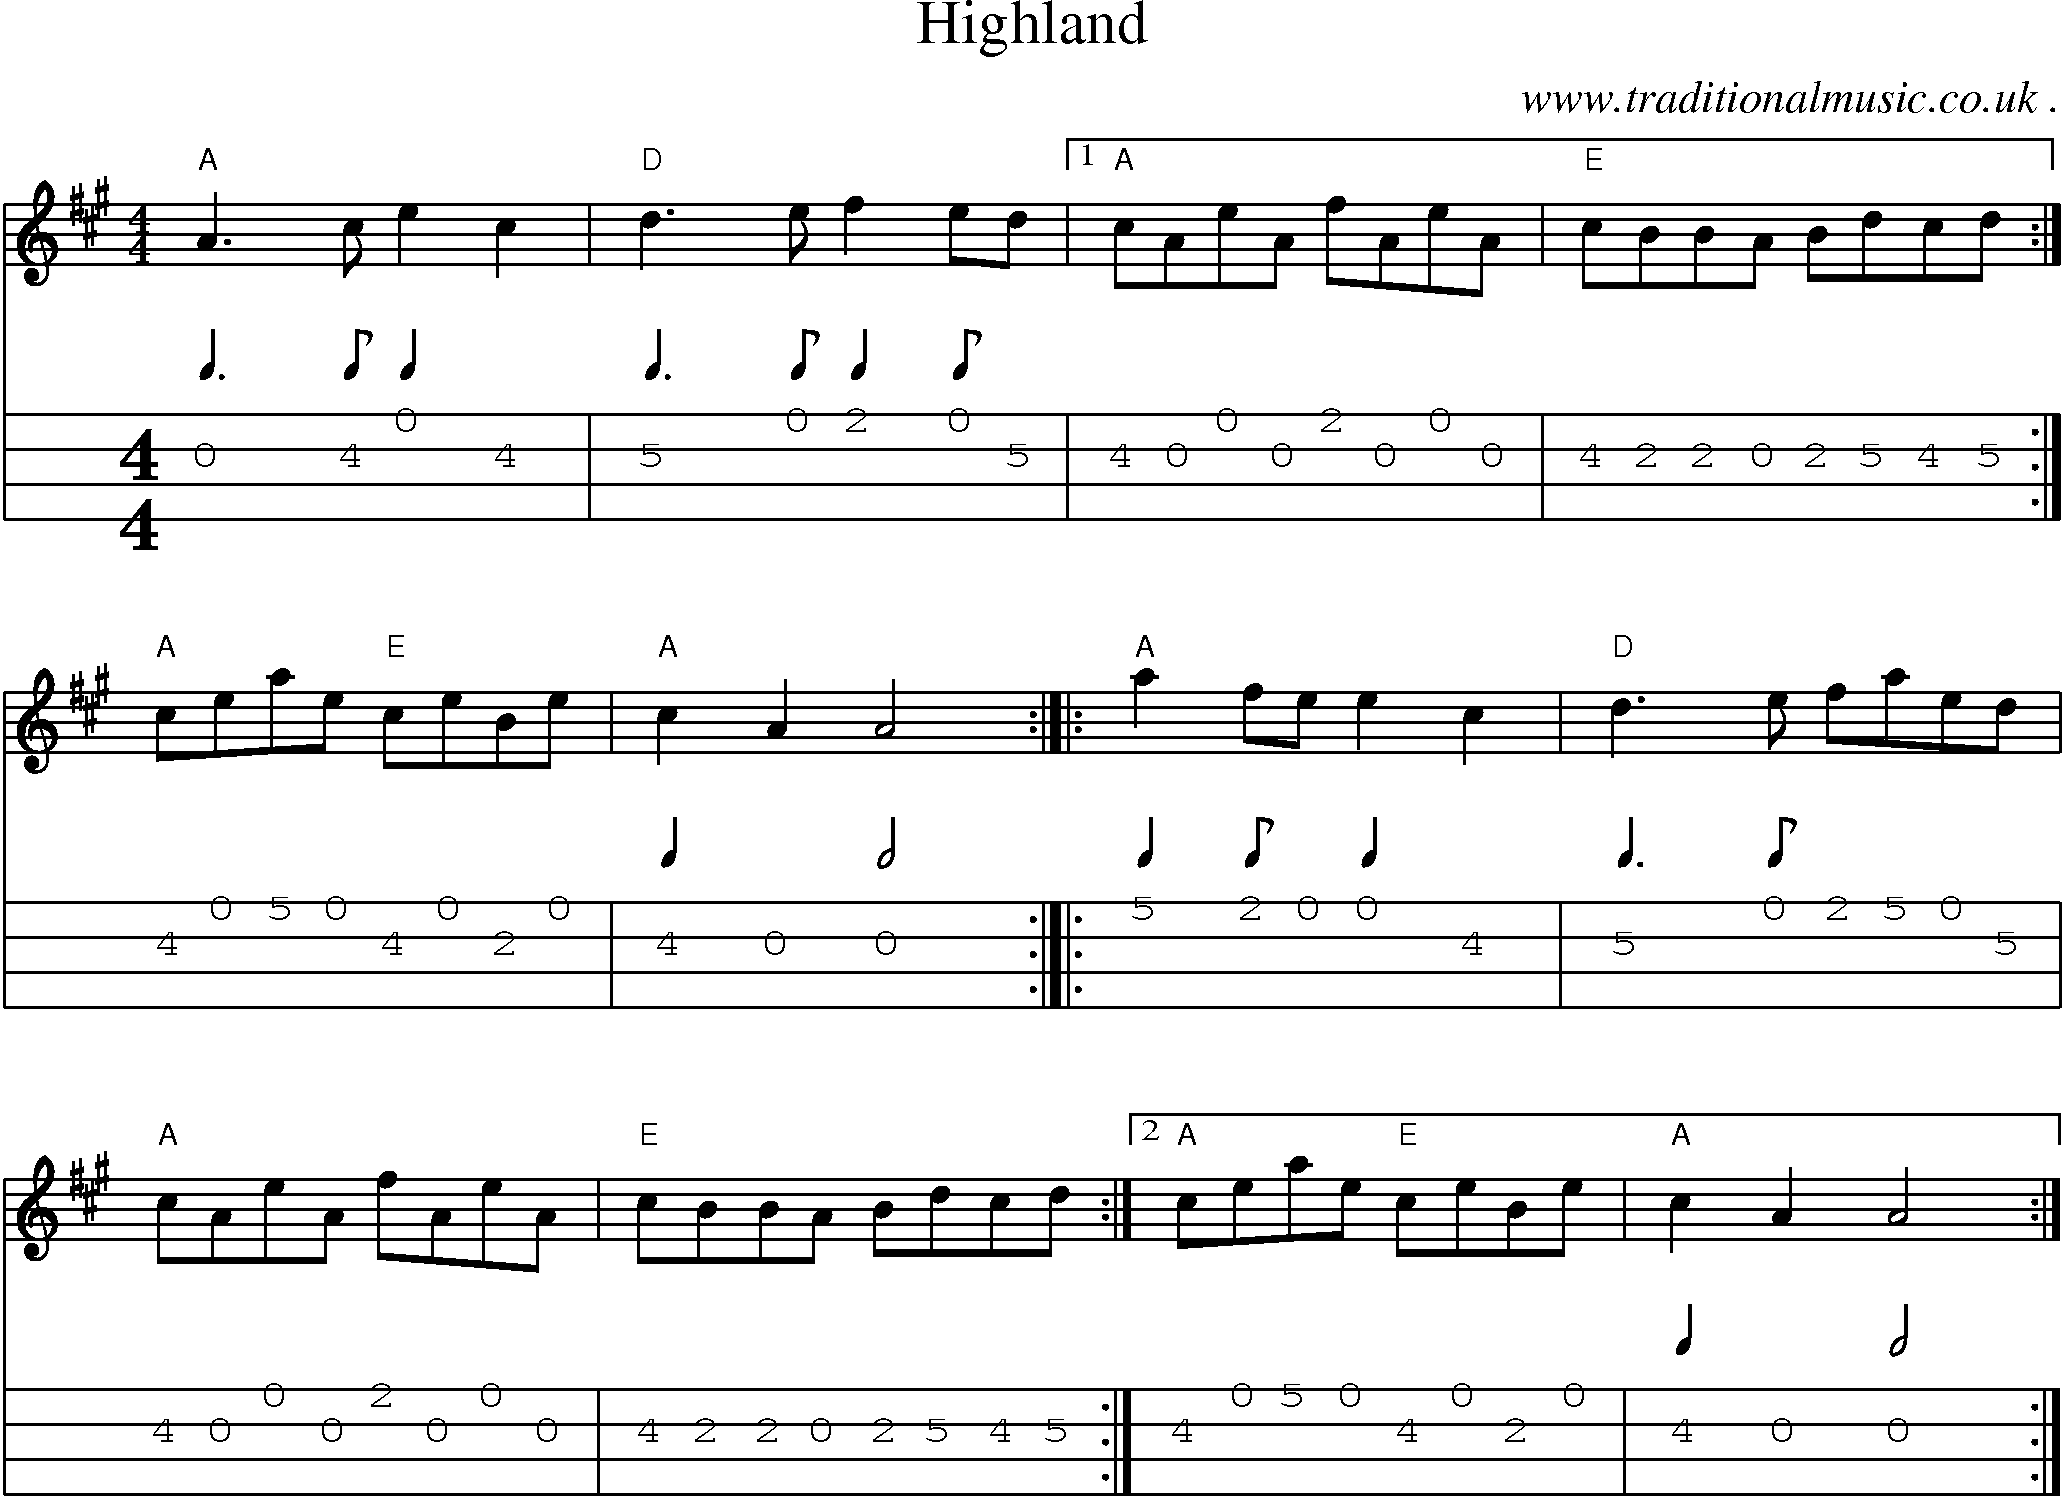 Music Score and Guitar Tabs for Highland